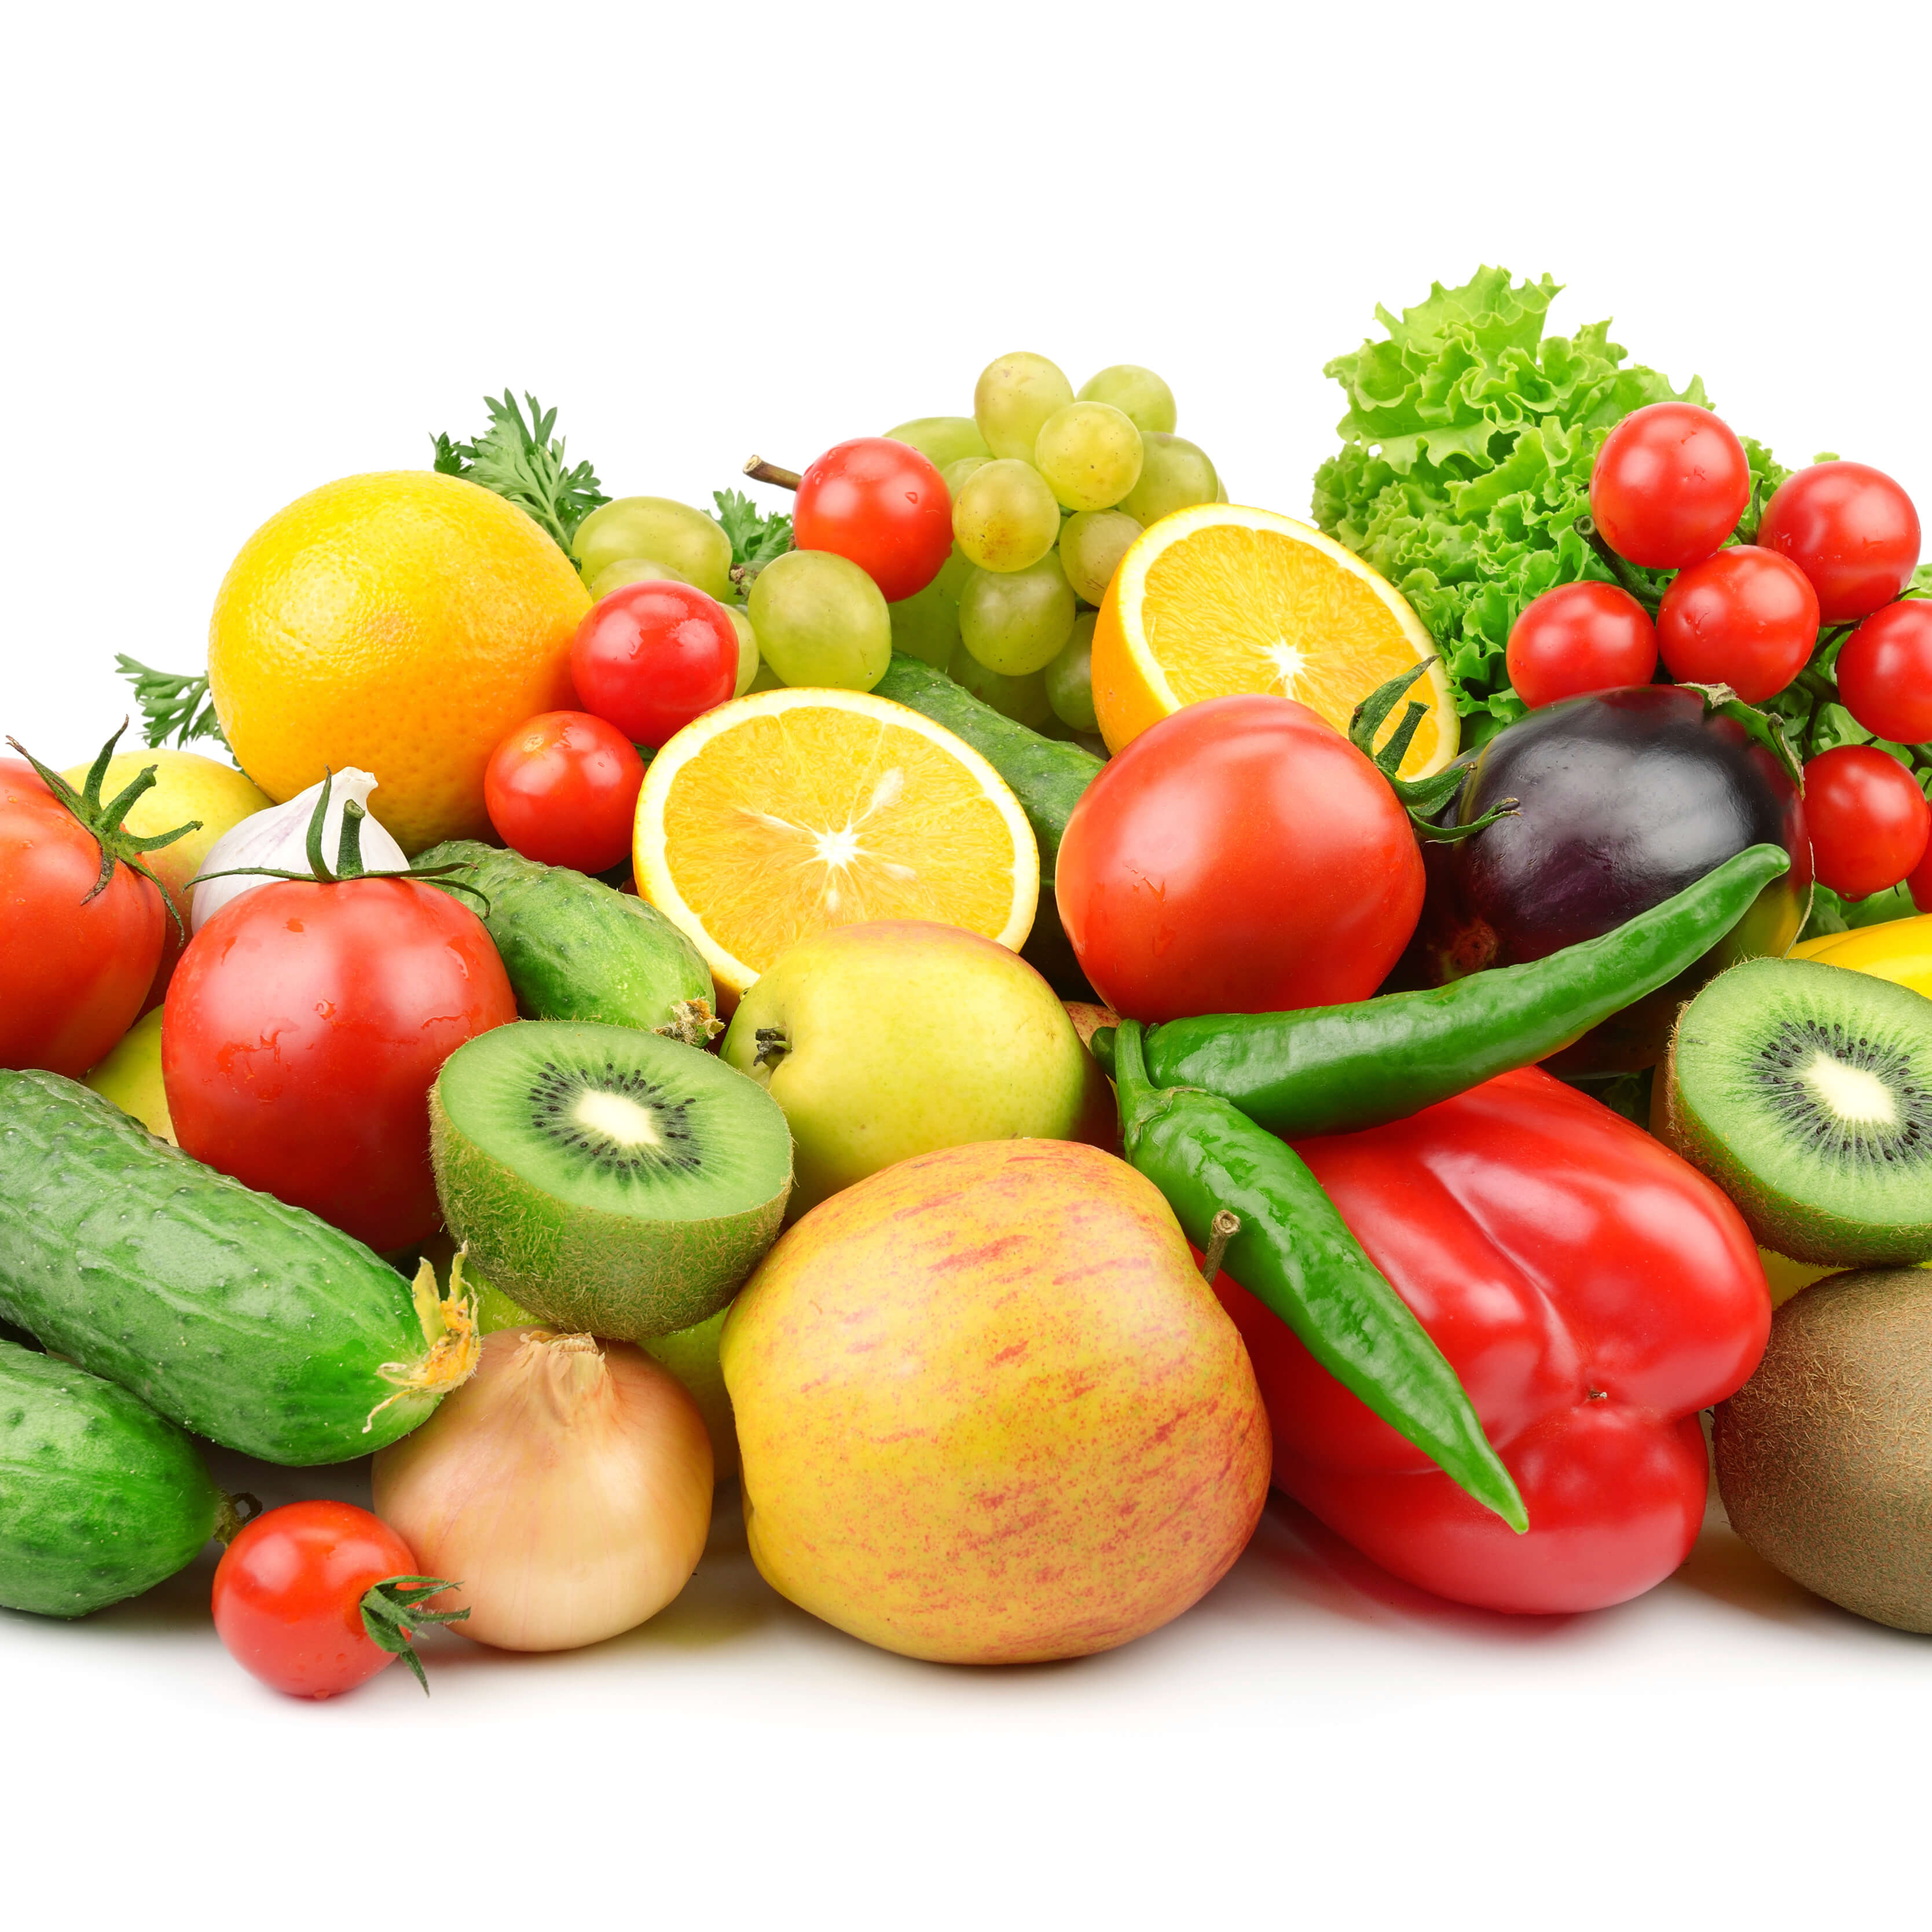 Reasons to Avoid Pre-Cut Vegetables and Fruits